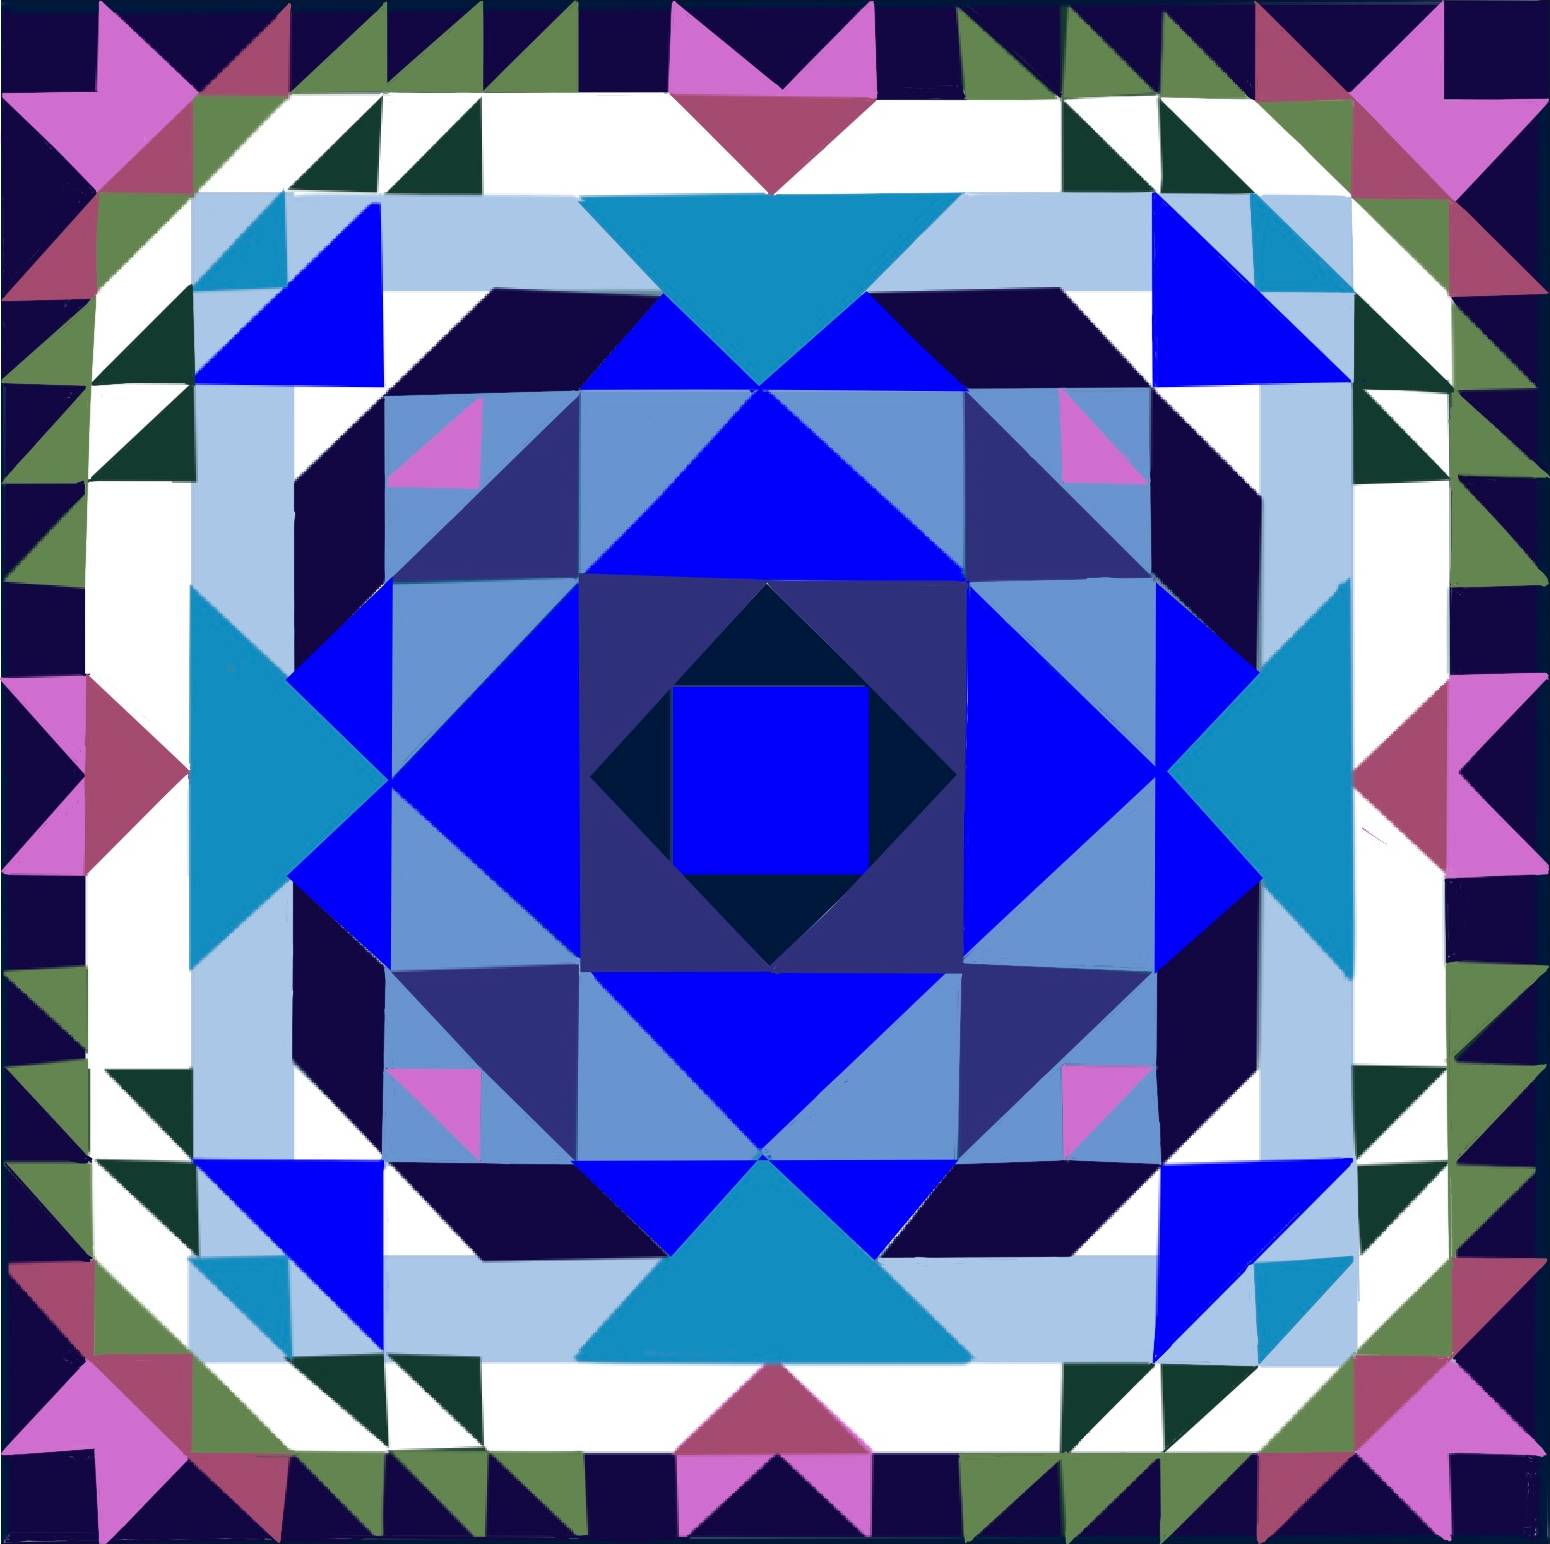 A quilted square with vibrant blue and purple shapes.